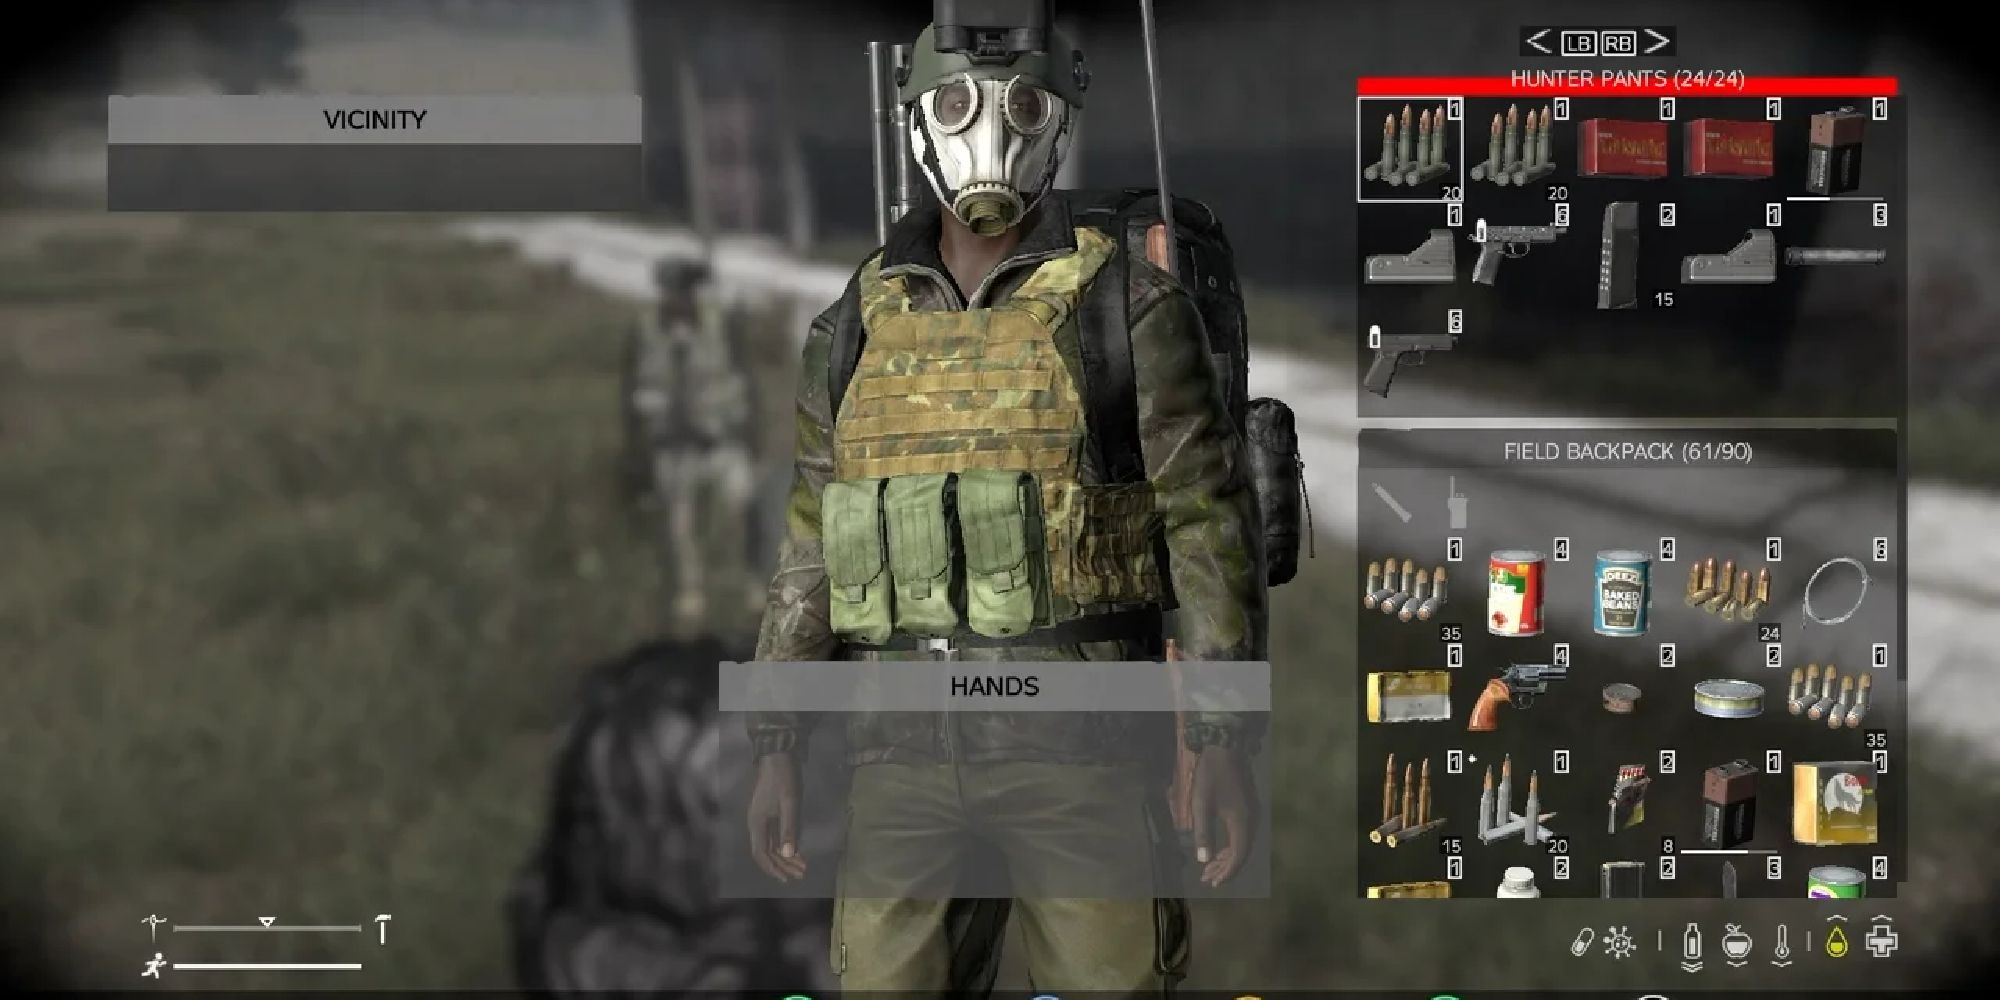 A players inventroy screen showing the Field Backpack and some of the content within.